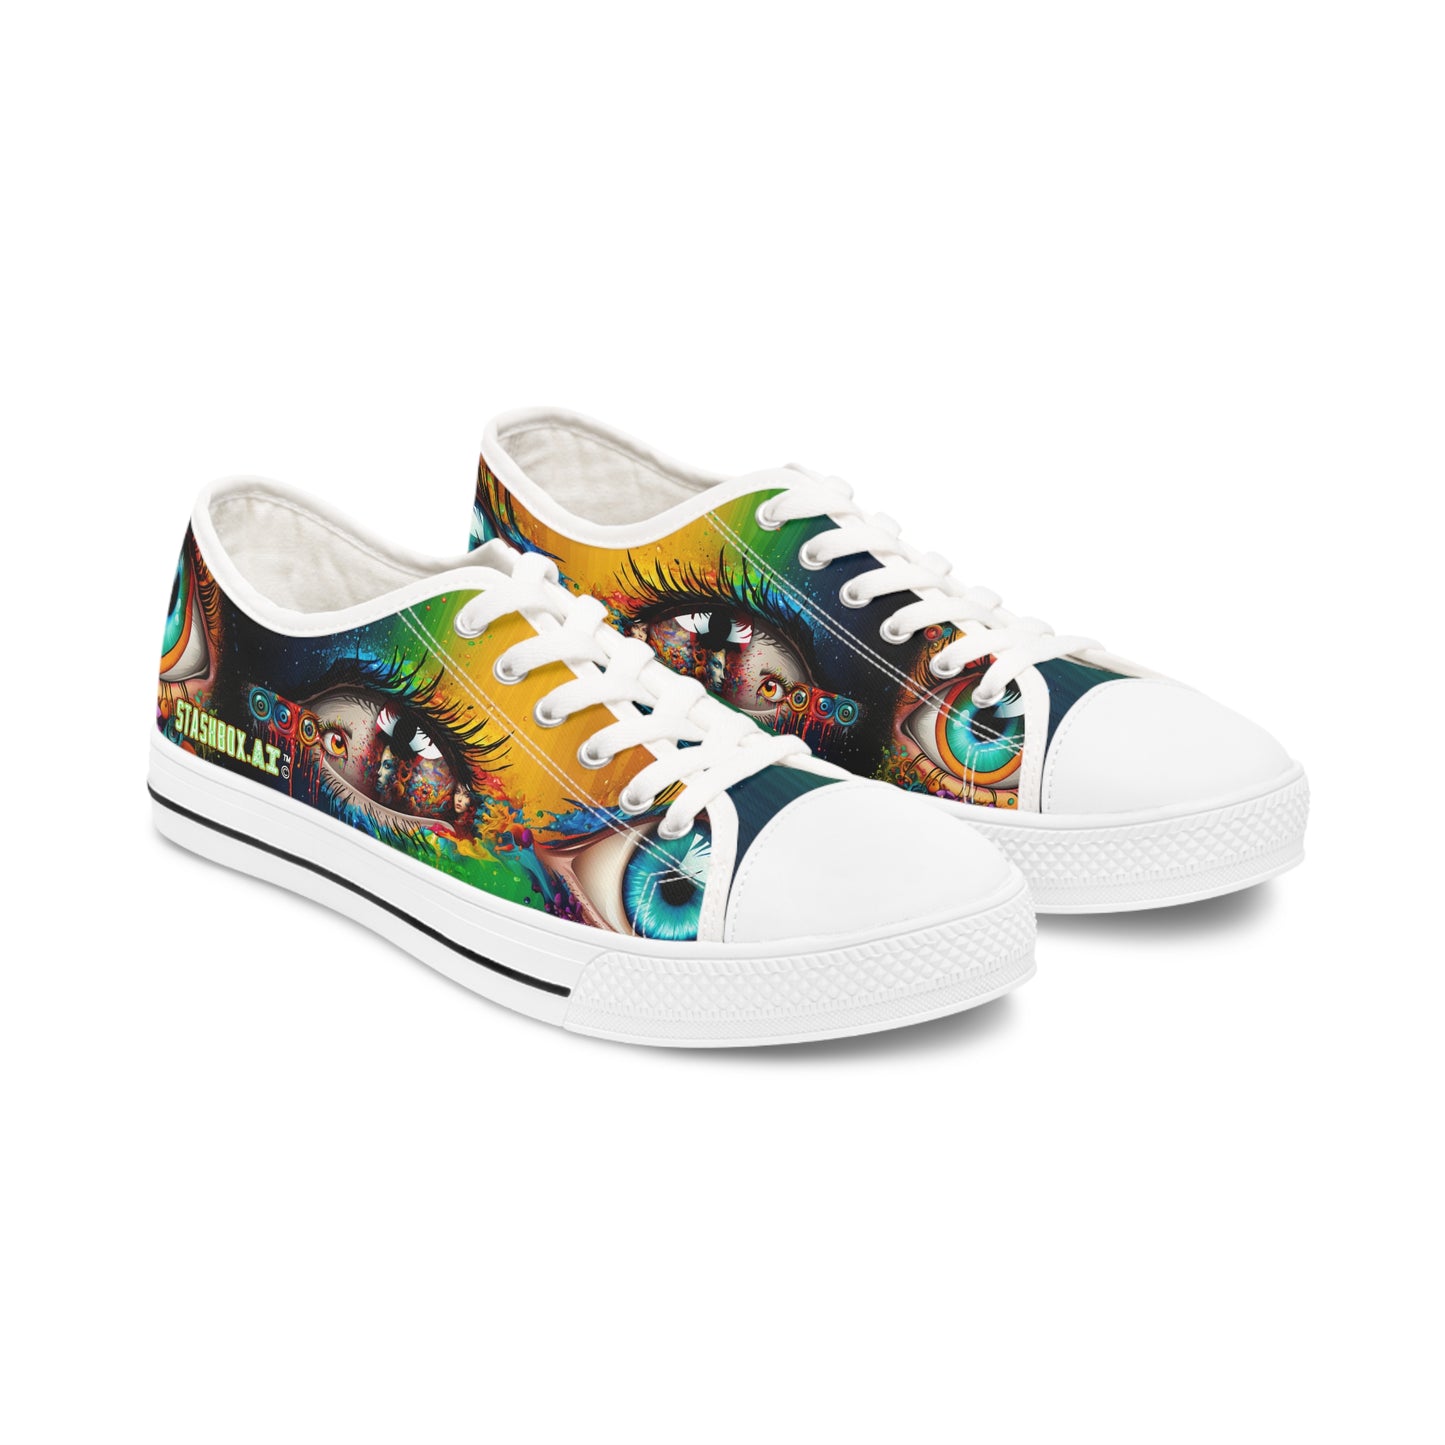 Stashbox Psychedelic Women's Shoes - Vibrant Eyes Design - #FashionStatement #BoldColors #ArtisticSneakers 